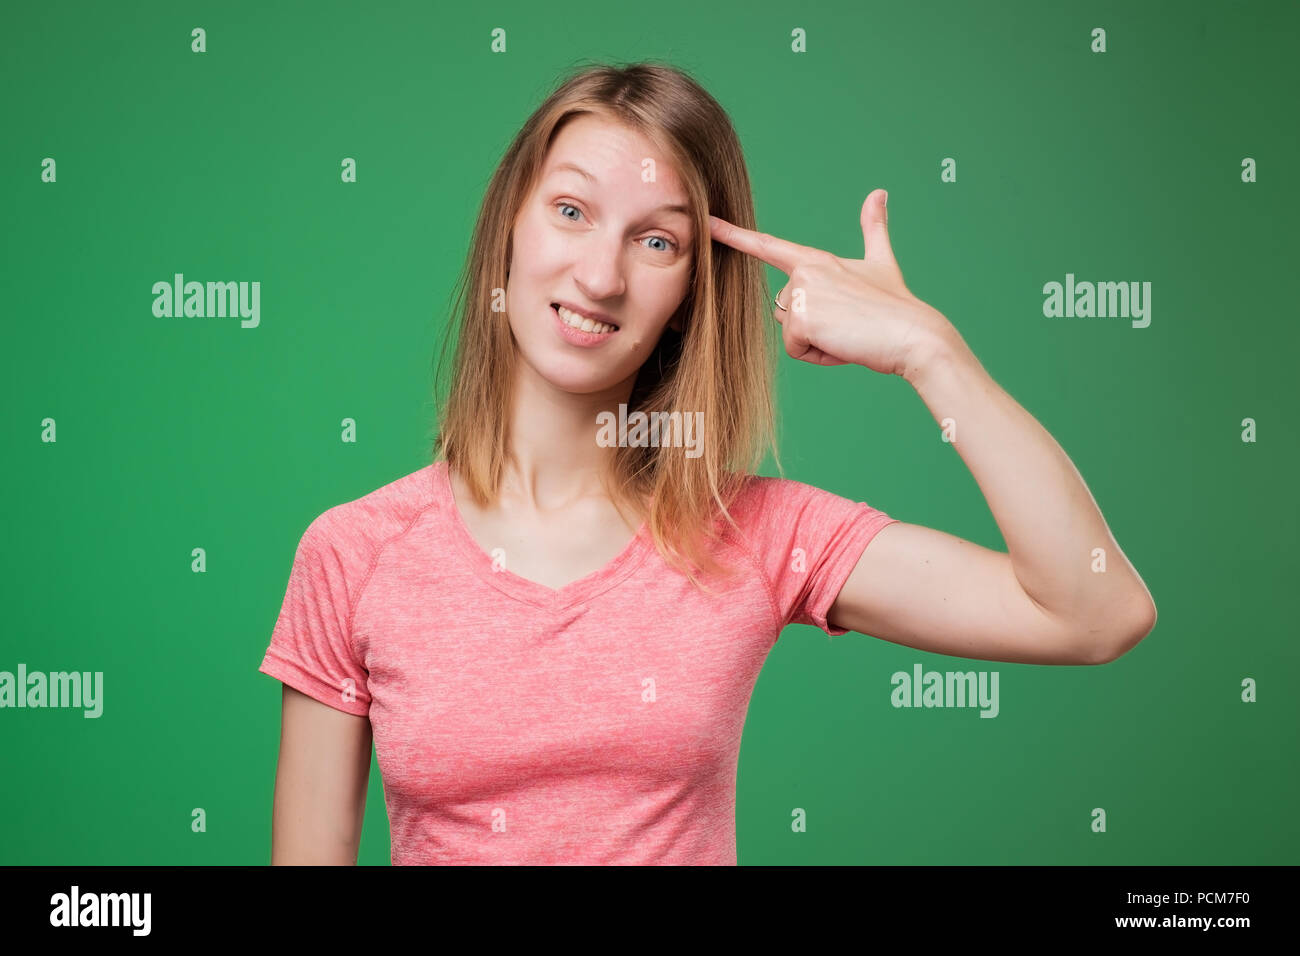 Image of european woman emotionally putting fingers to her temple like gun, being puzzled over green wall. Stock Photo